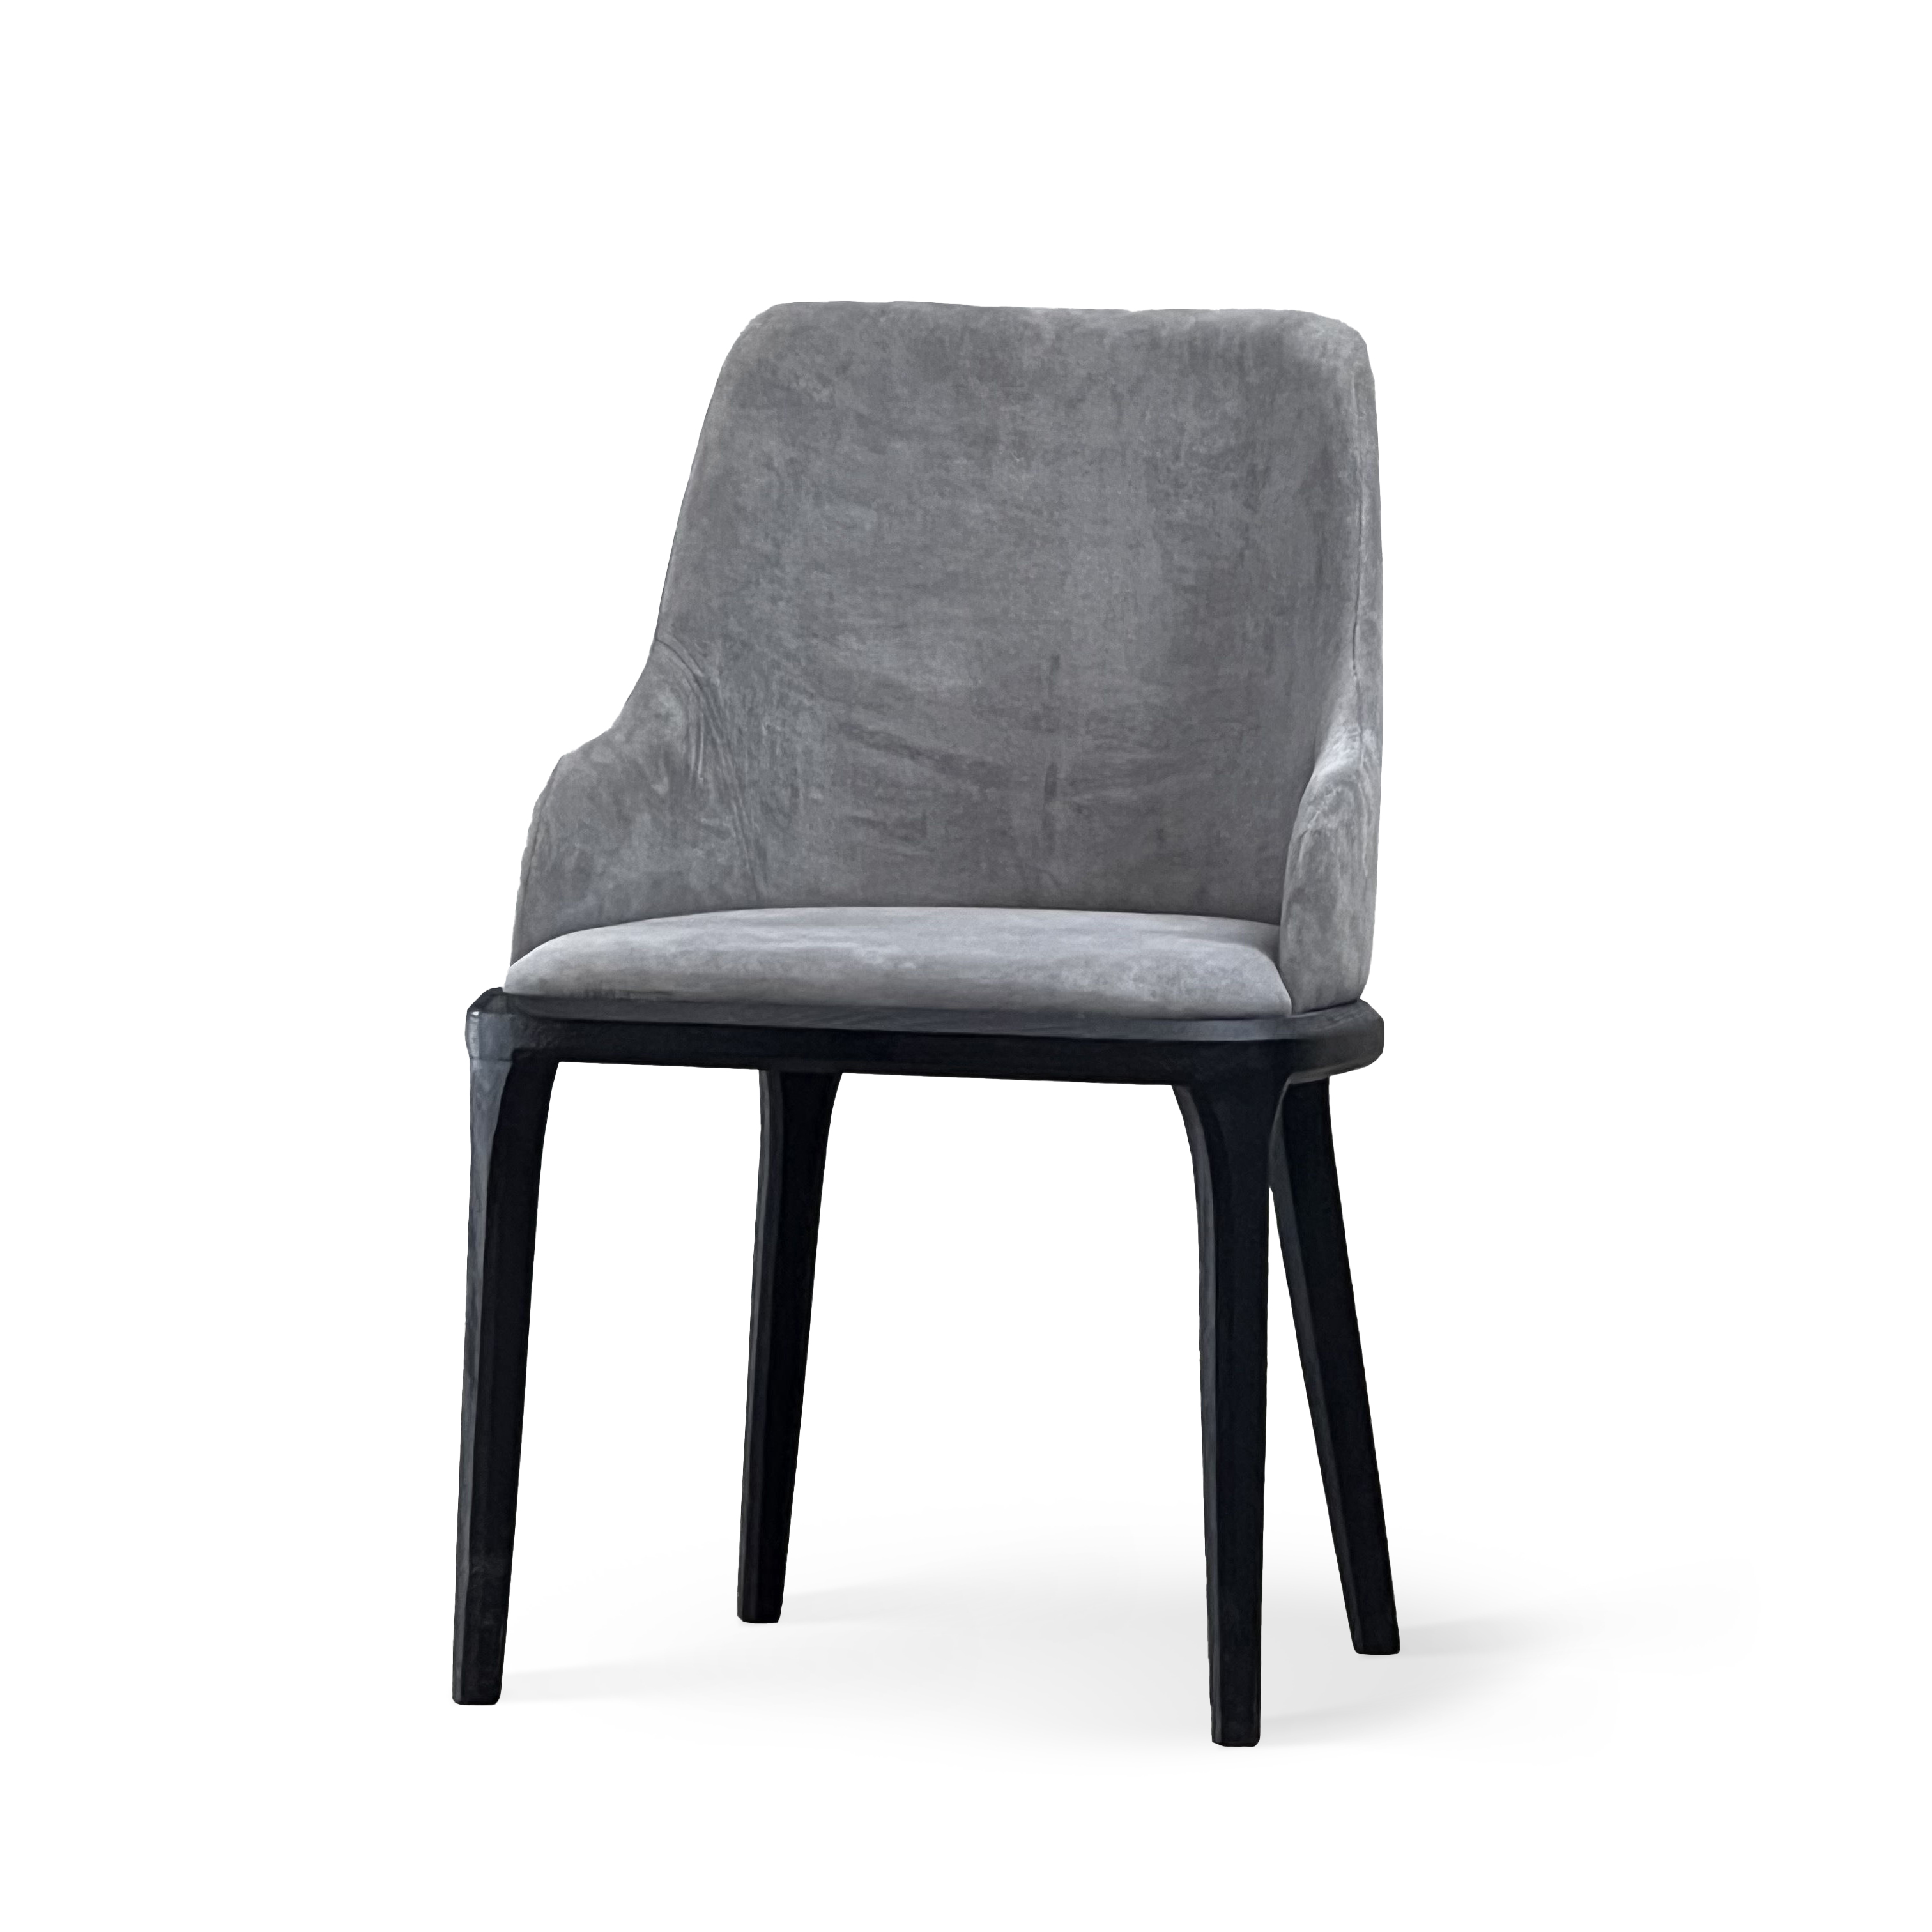 ANIS FABRIC ARMCHAIR BY TOLICA